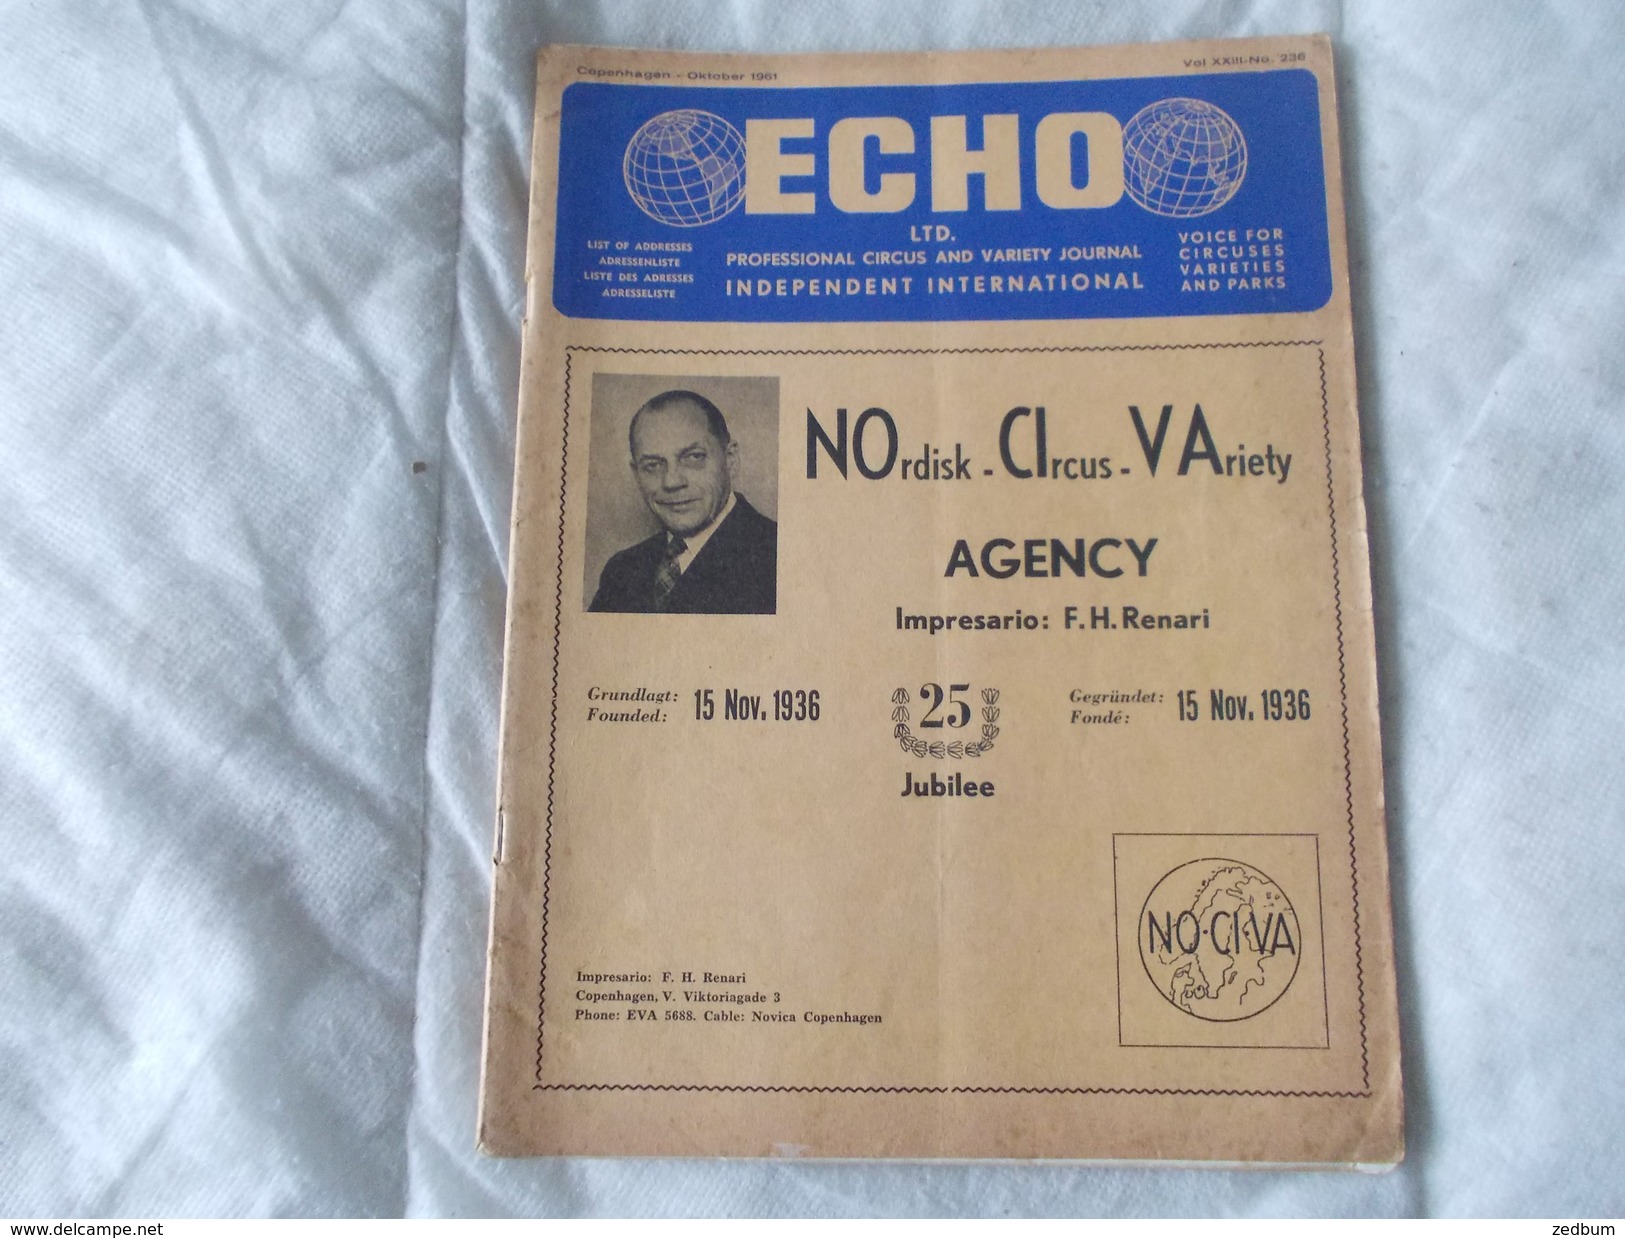 ECHO LTD Professional Circus And Variety Journal Independent International N° 236 October 1961 - Amusement